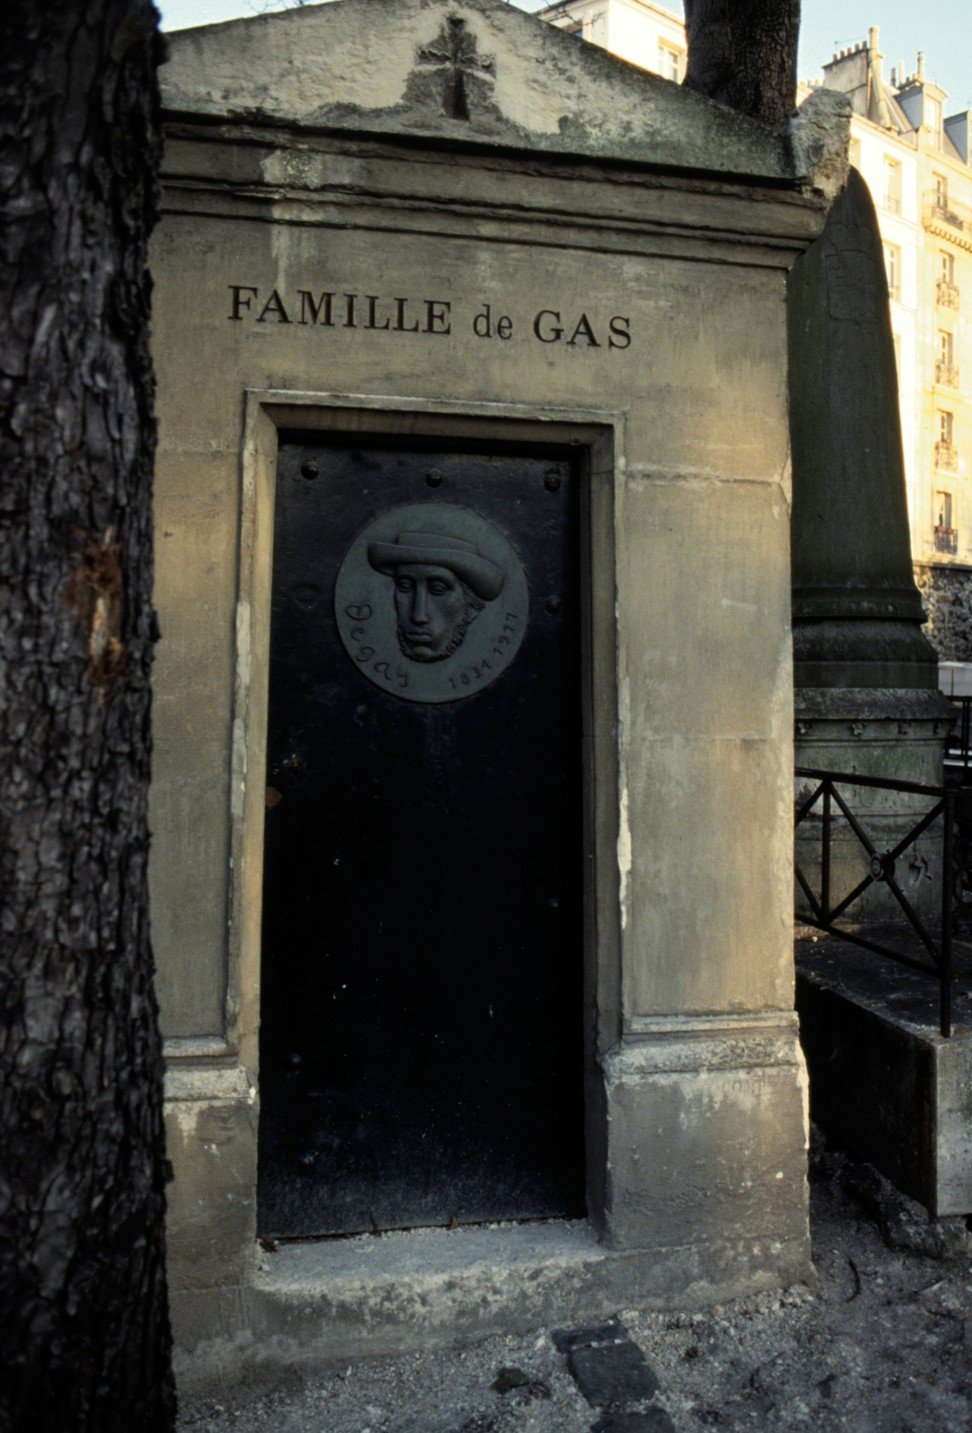 The tomb of Degas in Montmartre, France. Photo: Alamy